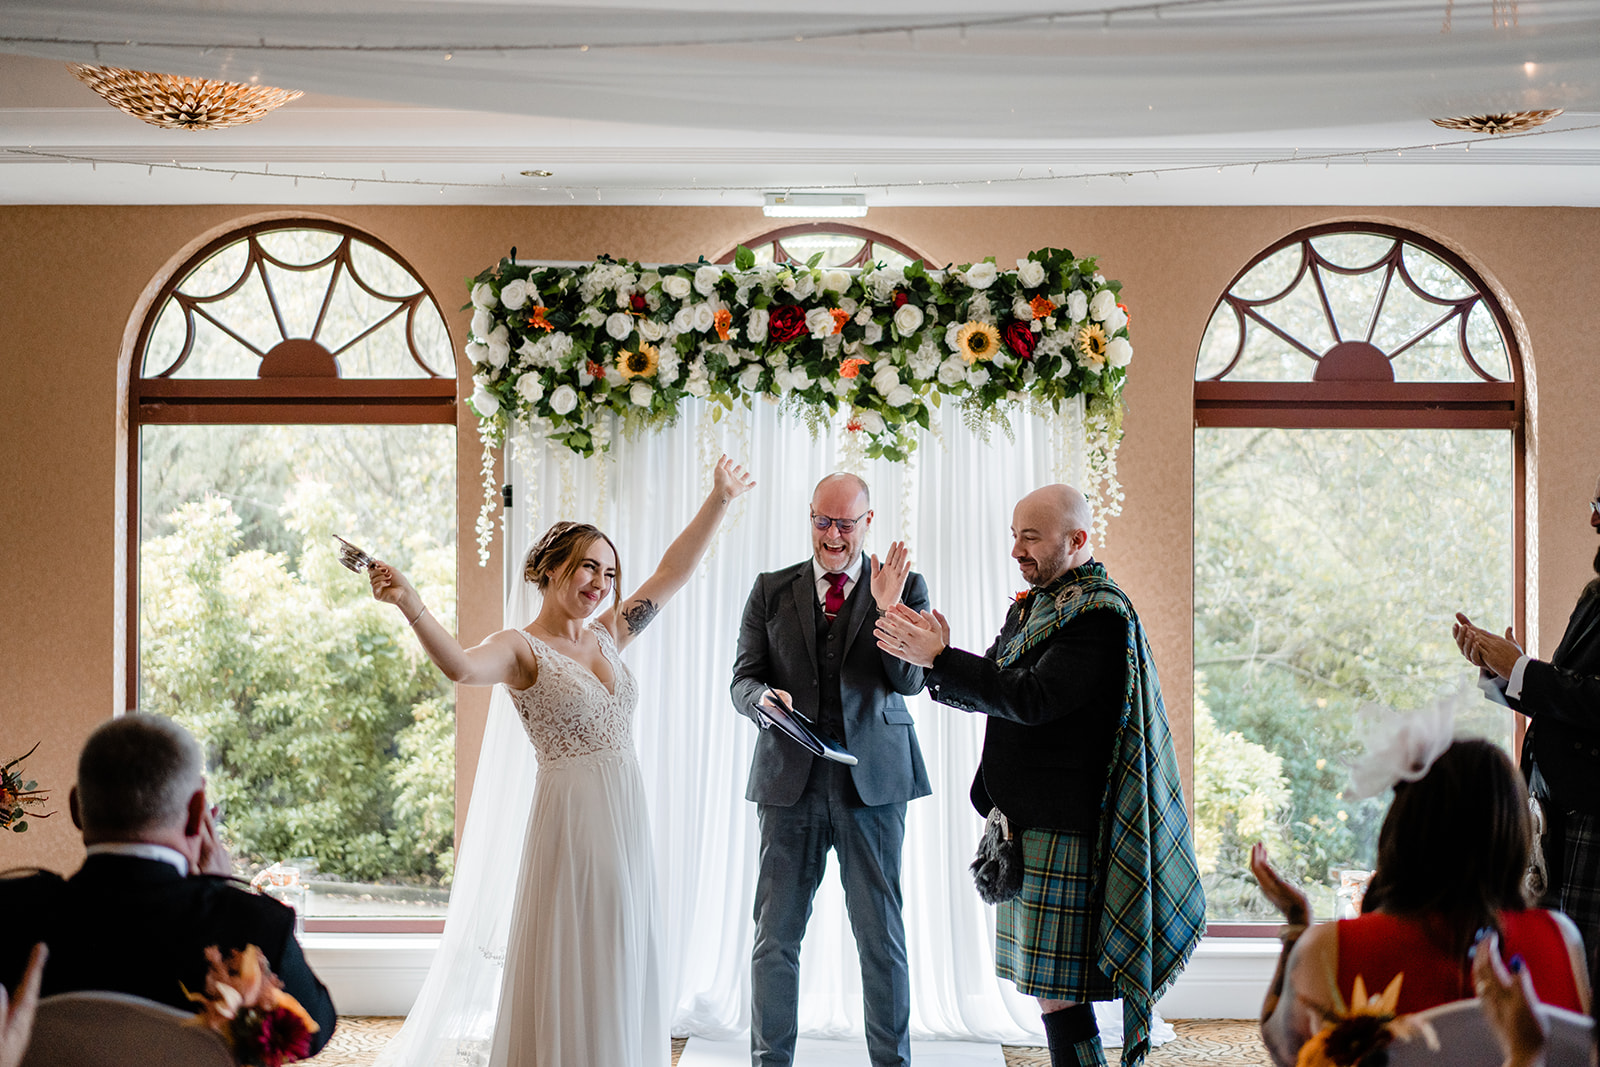 A couple tying the knot at Gleddoch Golf & Spa Resort in front of their family and friends.